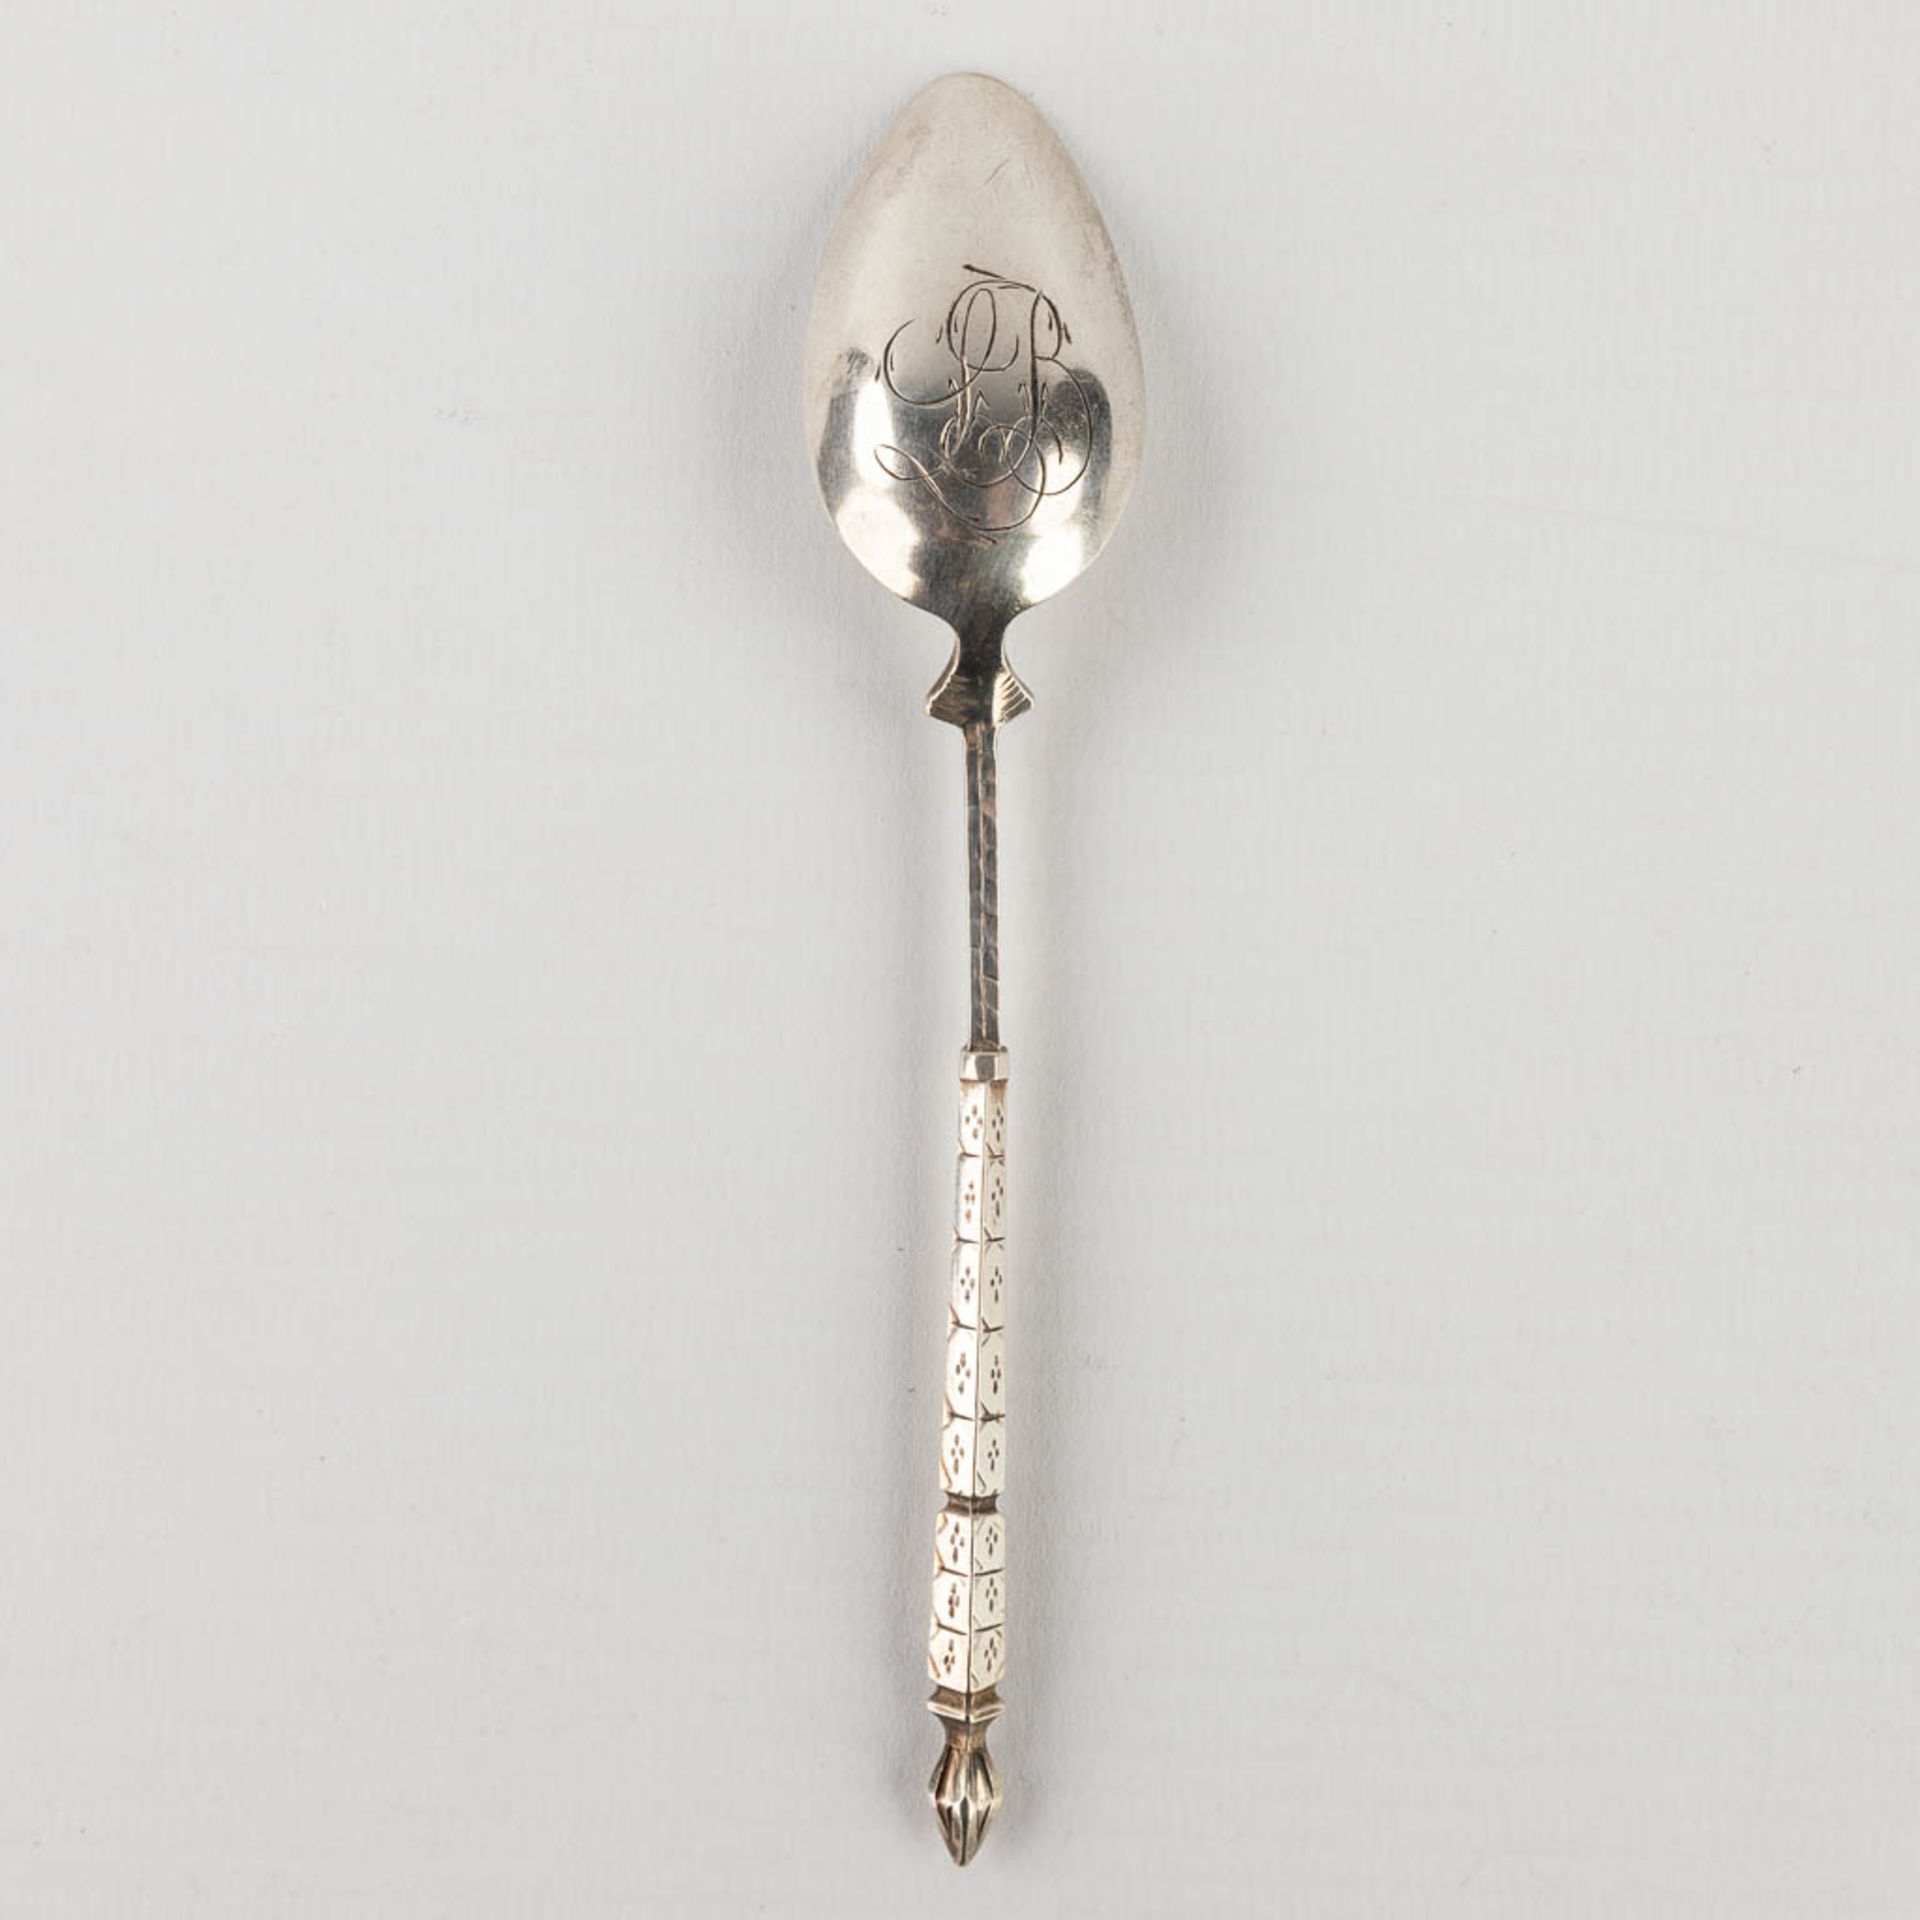 Two Ecrins with silver spoons, added 1 Ecrin with pieces of silver-plated cutlery marked Boulinger. - Image 16 of 18